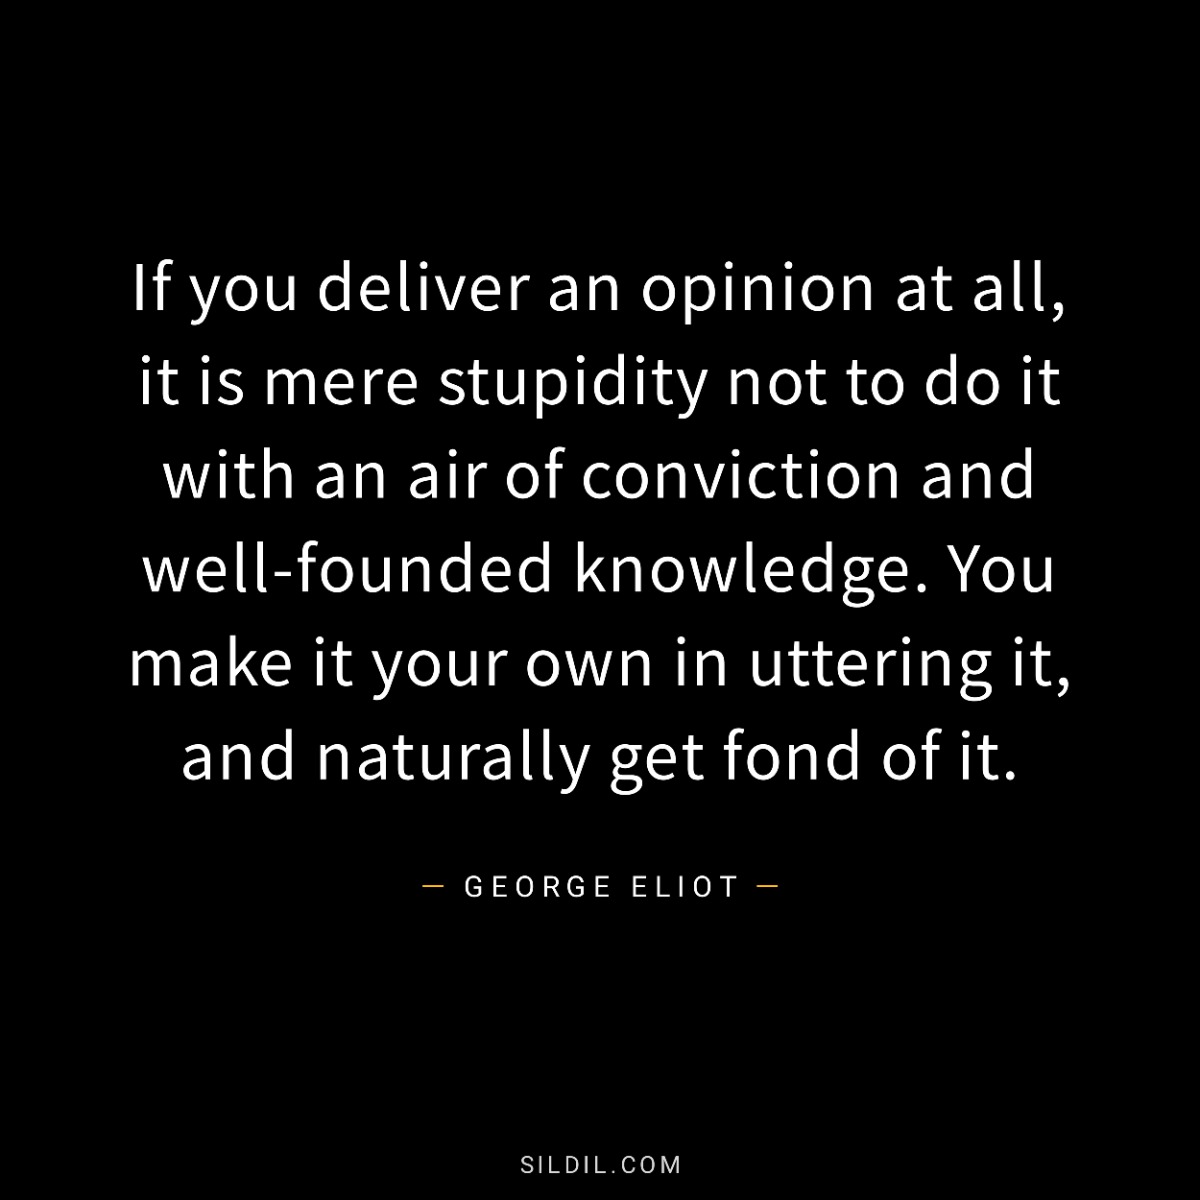 If you deliver an opinion at all, it is mere stupidity not to do it with an air of conviction and well-founded knowledge. You make it your own in uttering it, and naturally get fond of it.